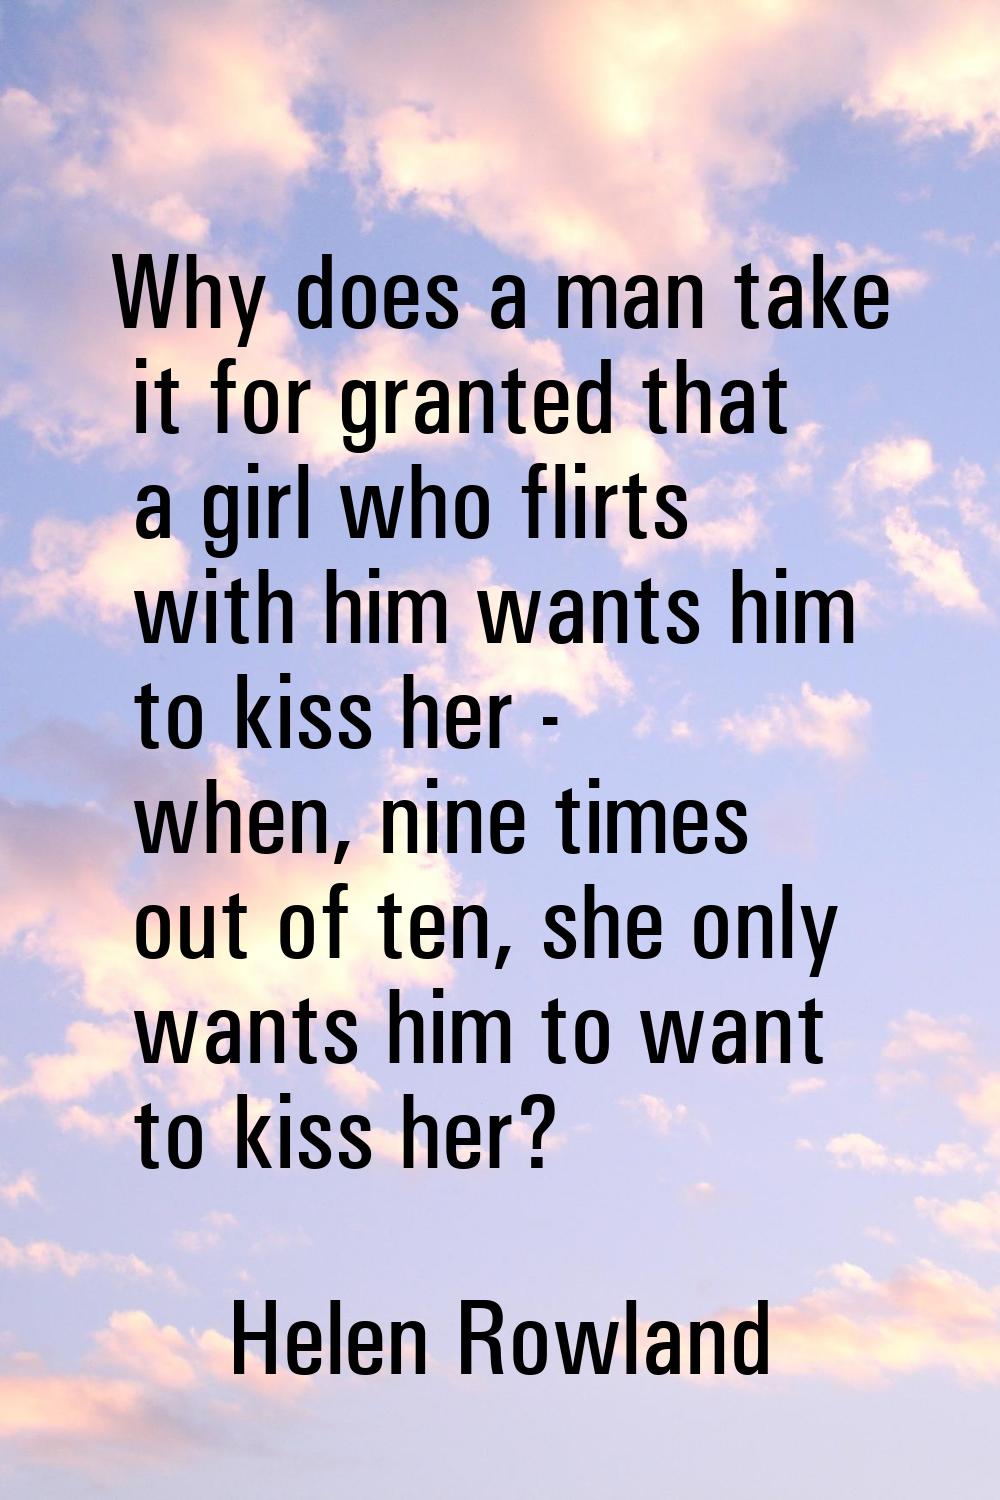 Why does a man take it for granted that a girl who flirts with him wants him to kiss her - when, ni